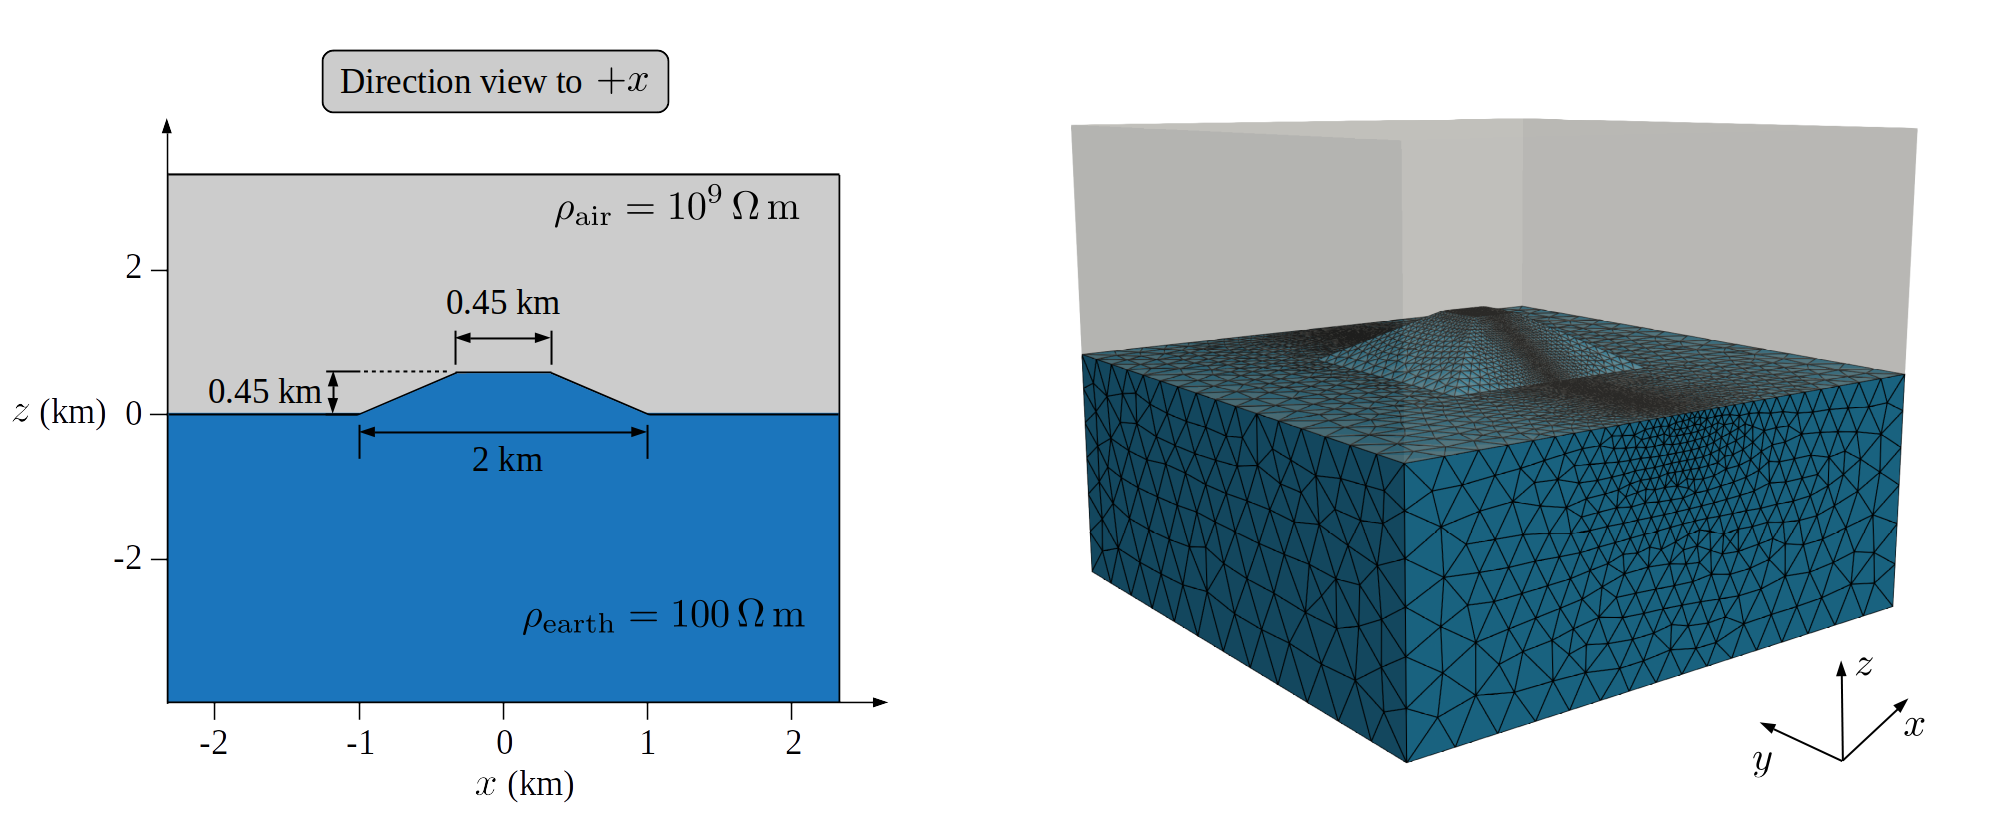 Cross-section view of the 3D trapezoidal hill model (left-panel) with its resulting computational unstructured and hp-adapted mesh for p=2 (right-panel).